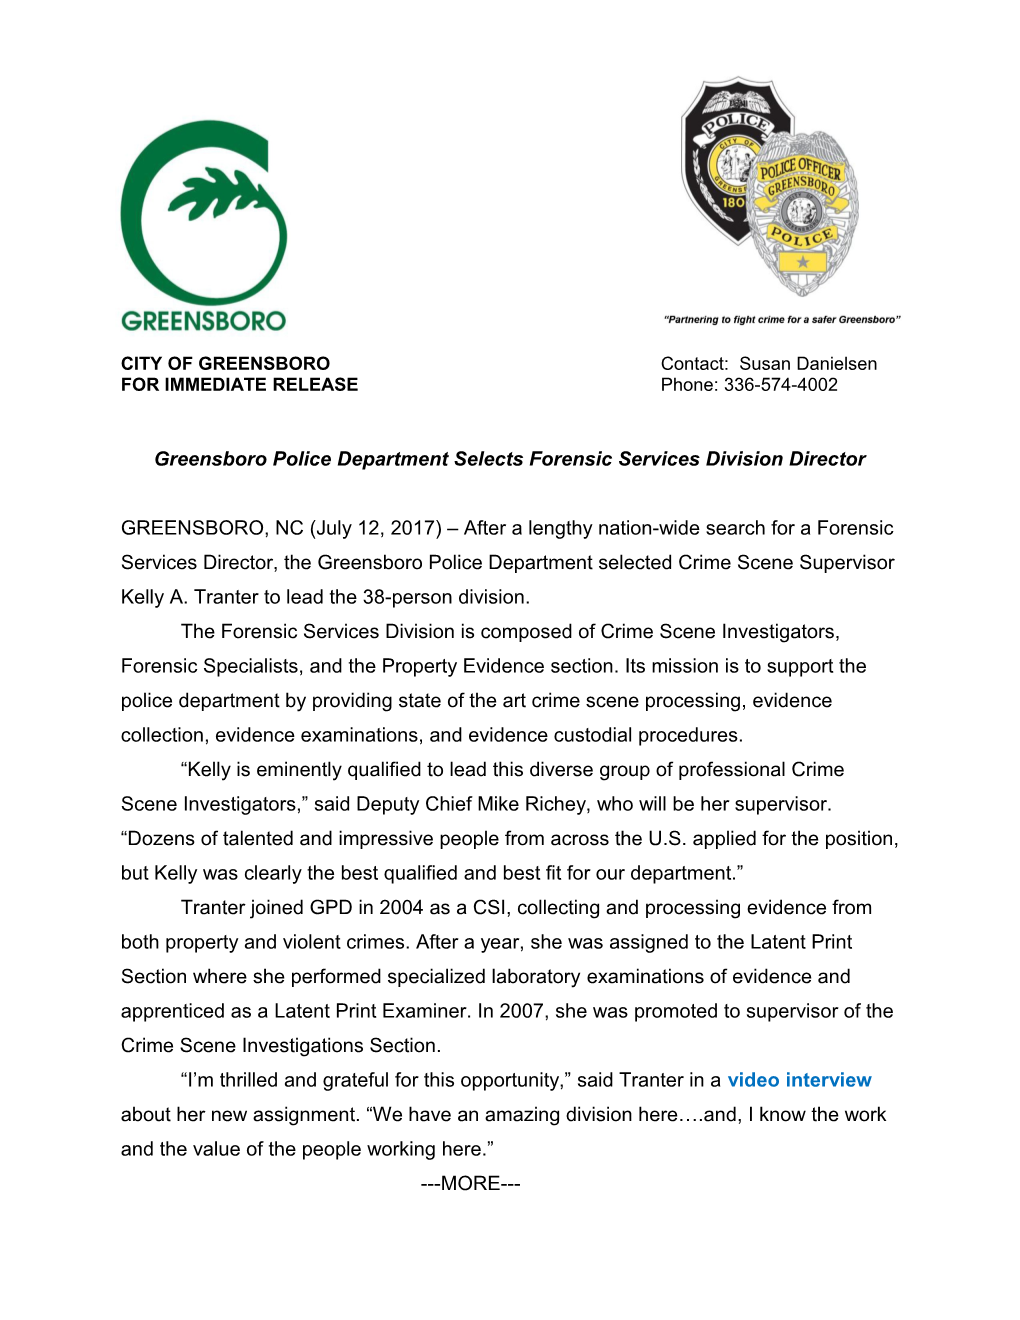 Greensboro Police Department Selects Forensic Services Division Director